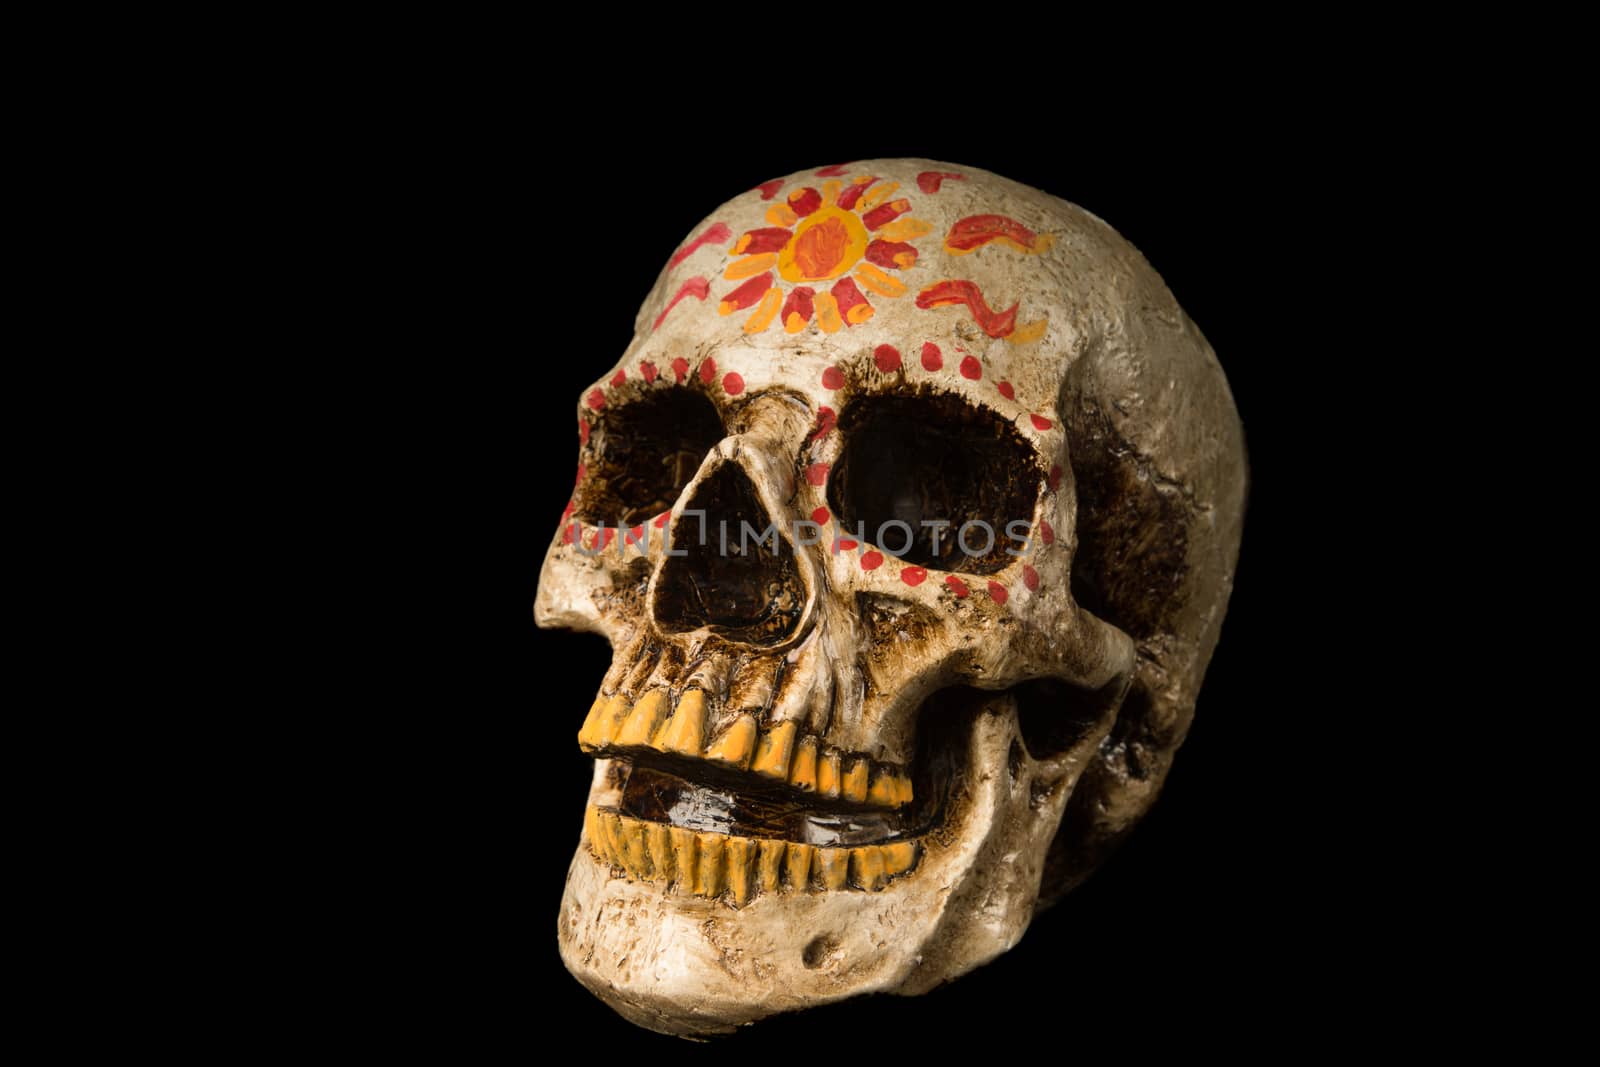 Hand painted Dia de los Muertos (Day of The Dead) skull isolated on black background